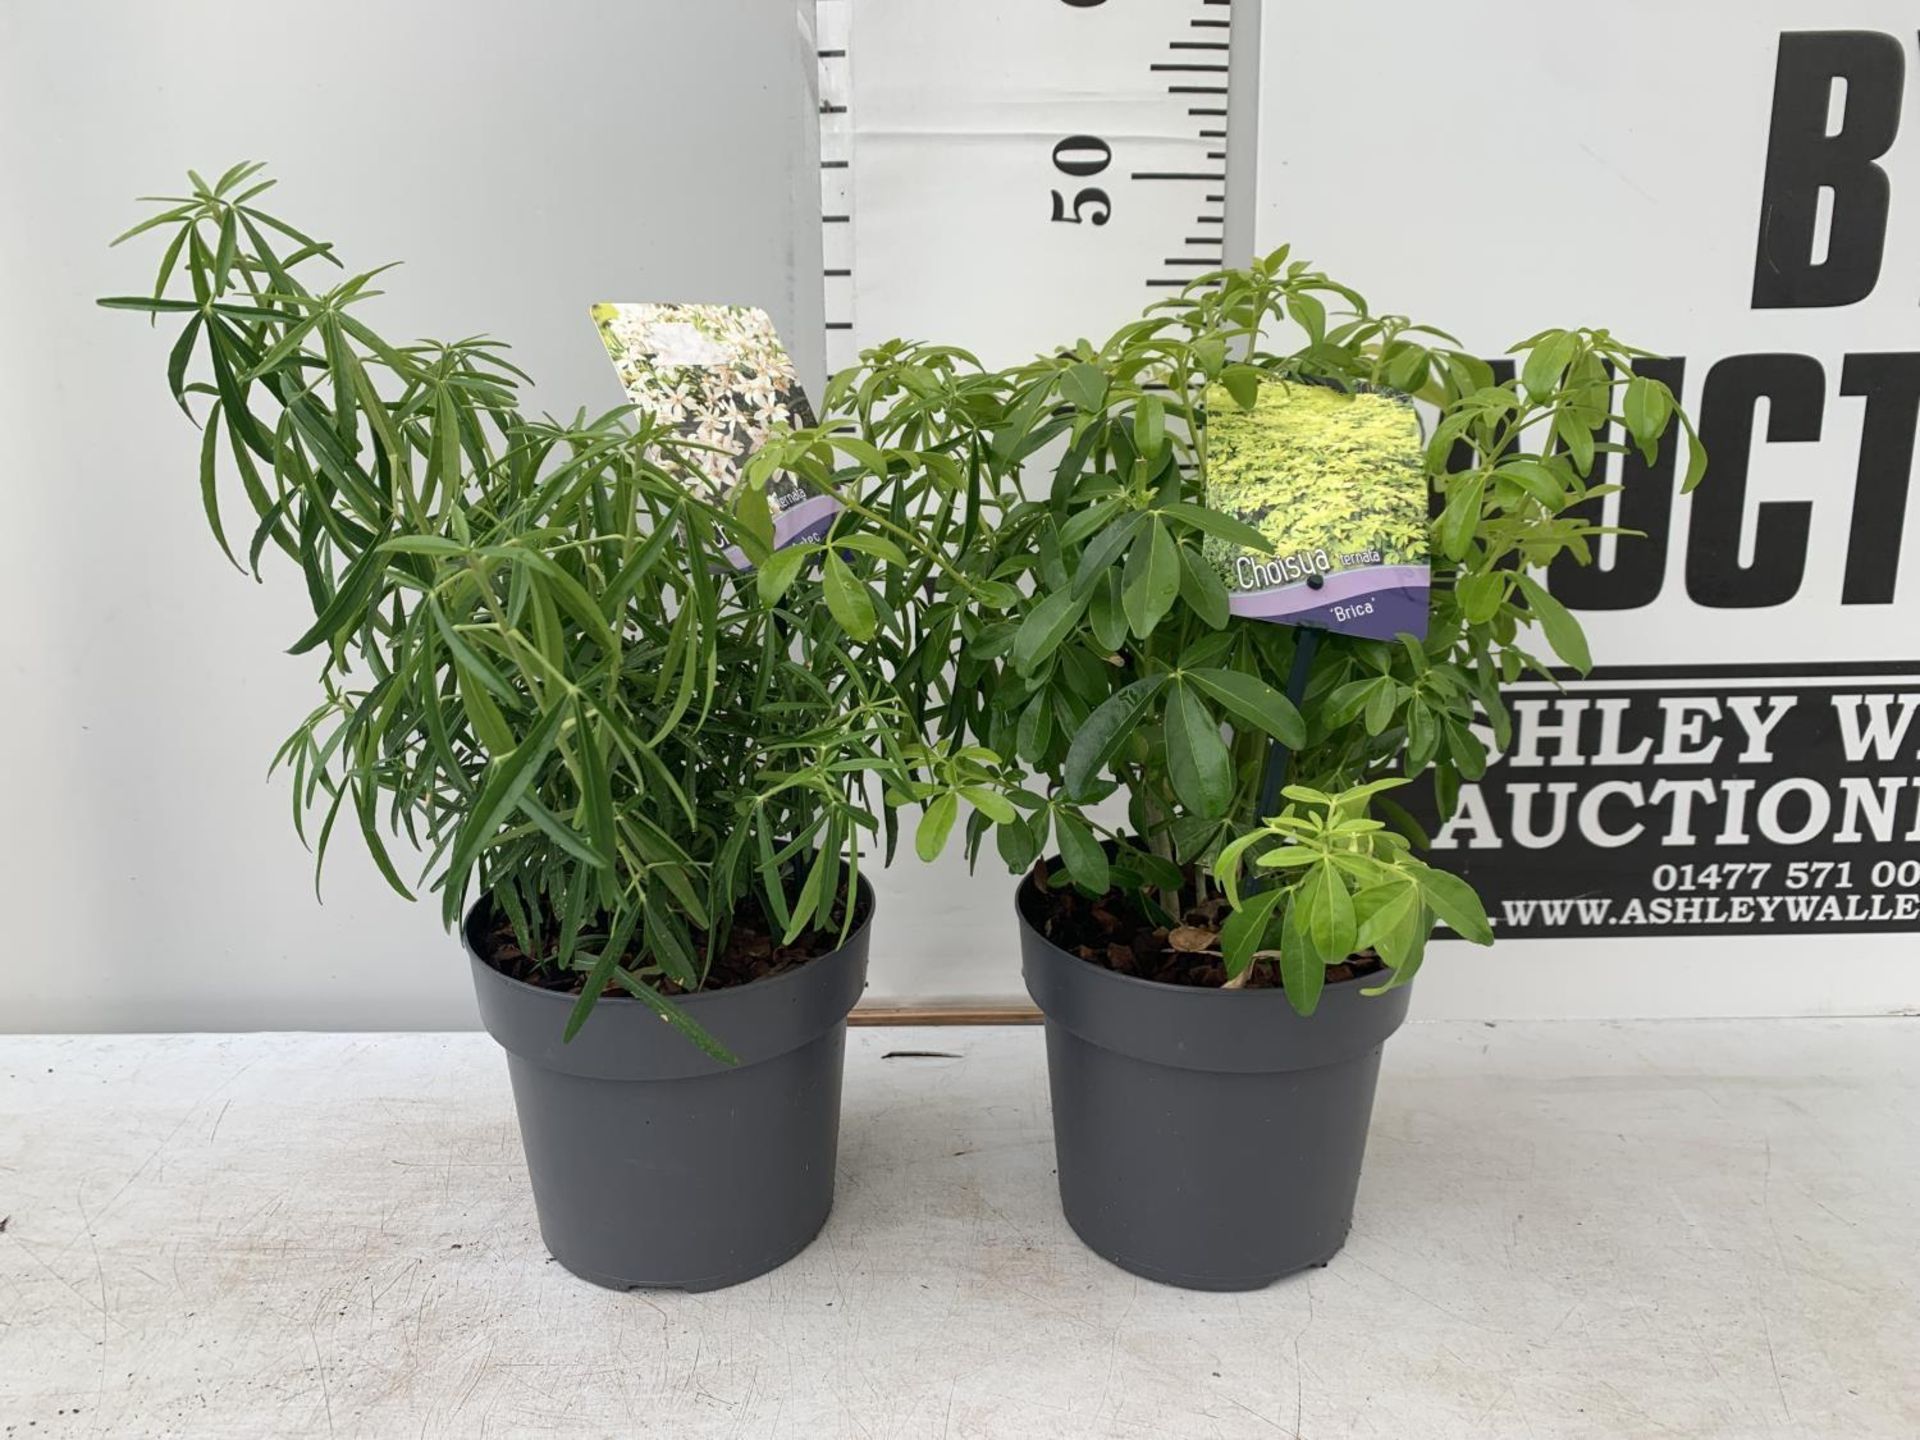 TWO CHOSIYA TERNATA 'BRICA' AND 'AZTEC PEARL' APPROX 45CM IN HEIGHT IN 2 LTR POTS PLUS VAT TO BE - Image 2 of 10